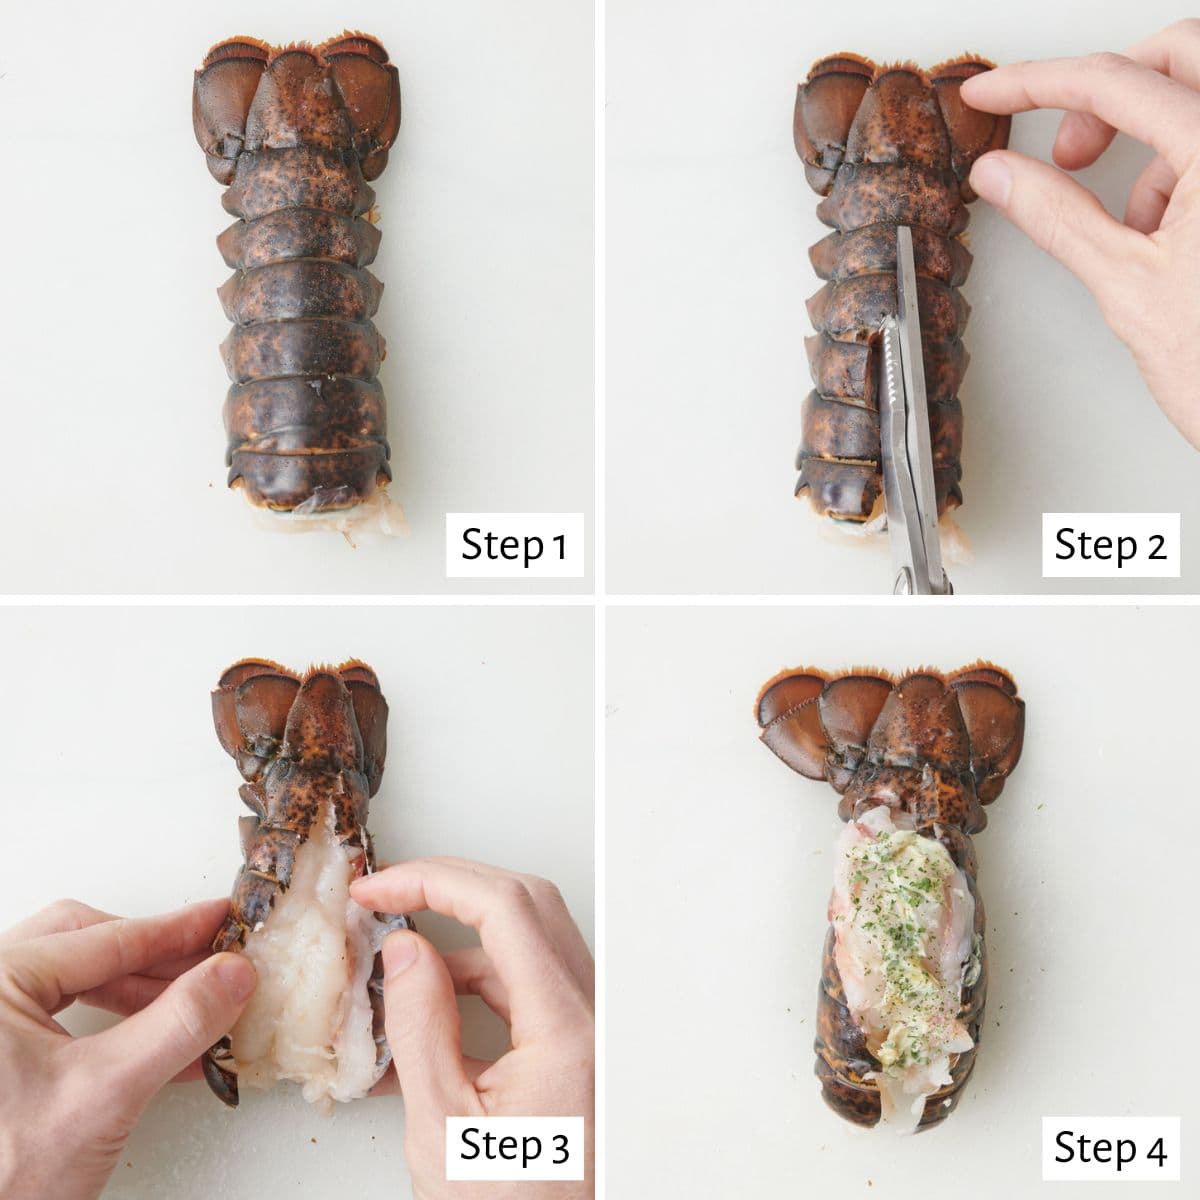 4 image collage preparing lobster tail for cooking: 1- tail on surface, 2- kitchen sheers cutting the back of shell down the center, 3- hands pulling back shell to lift up meat, 4- herbed butter added on top.